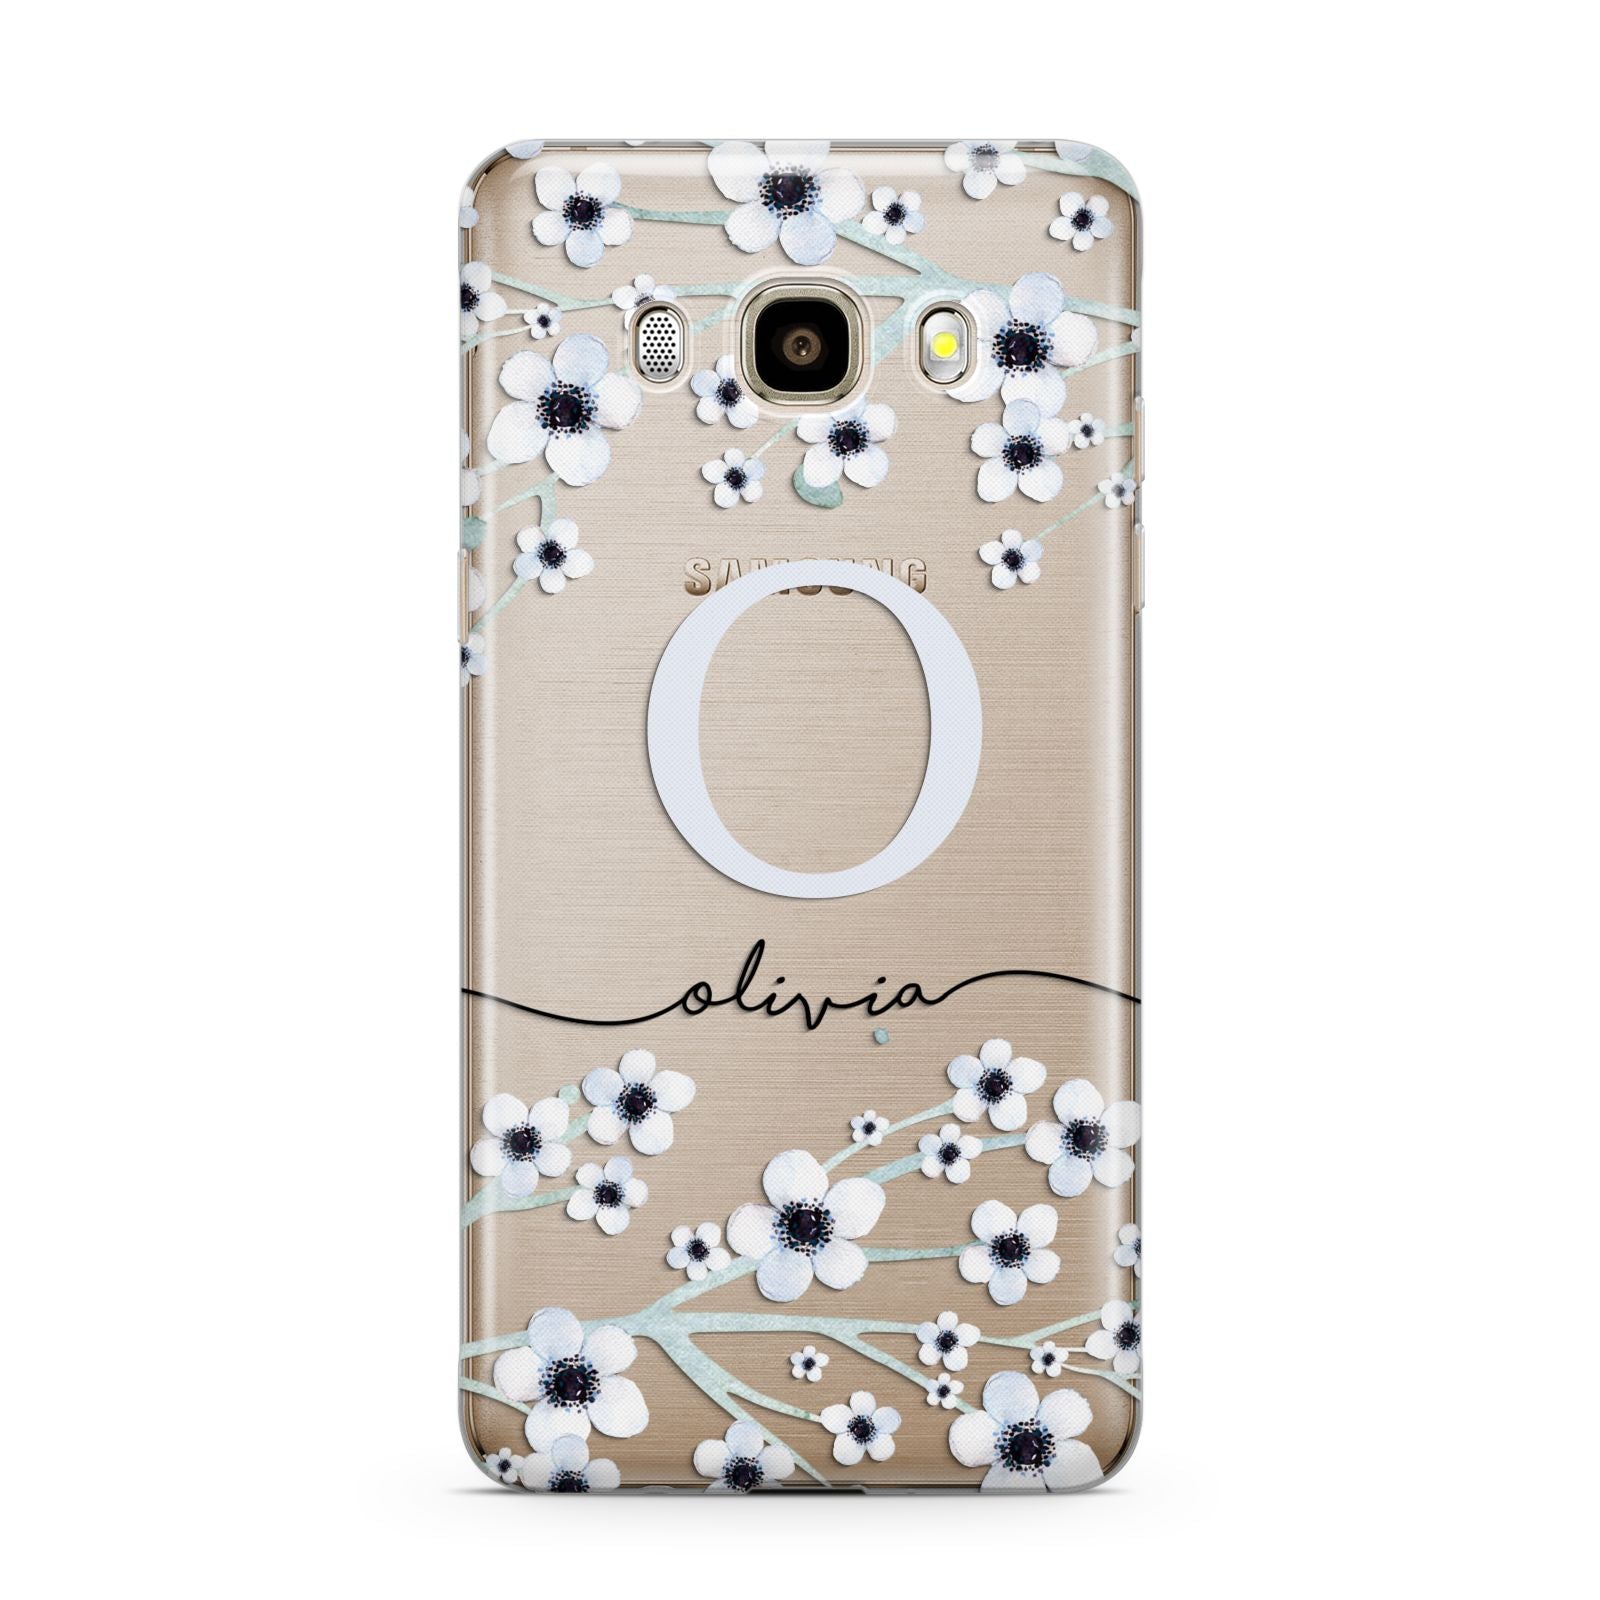 Personalised White Flower Samsung Galaxy J7 2016 Case on gold phone